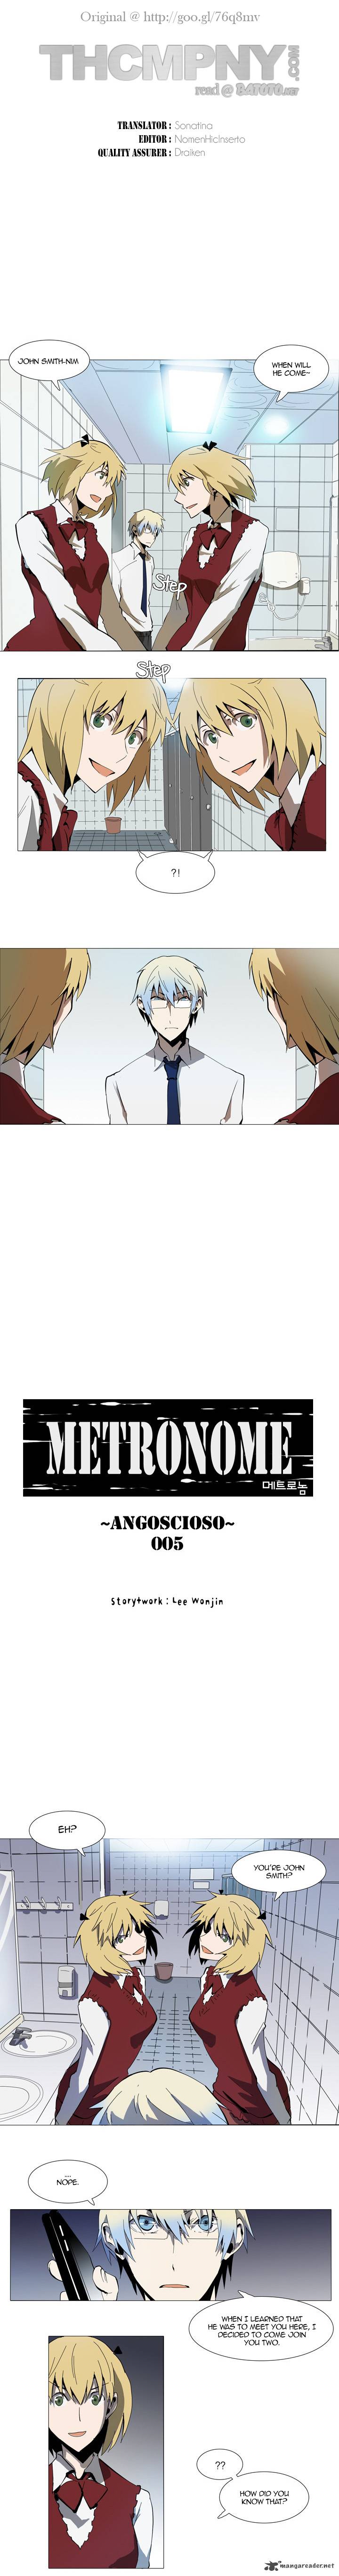 Metronome Chapter 19 Page 1